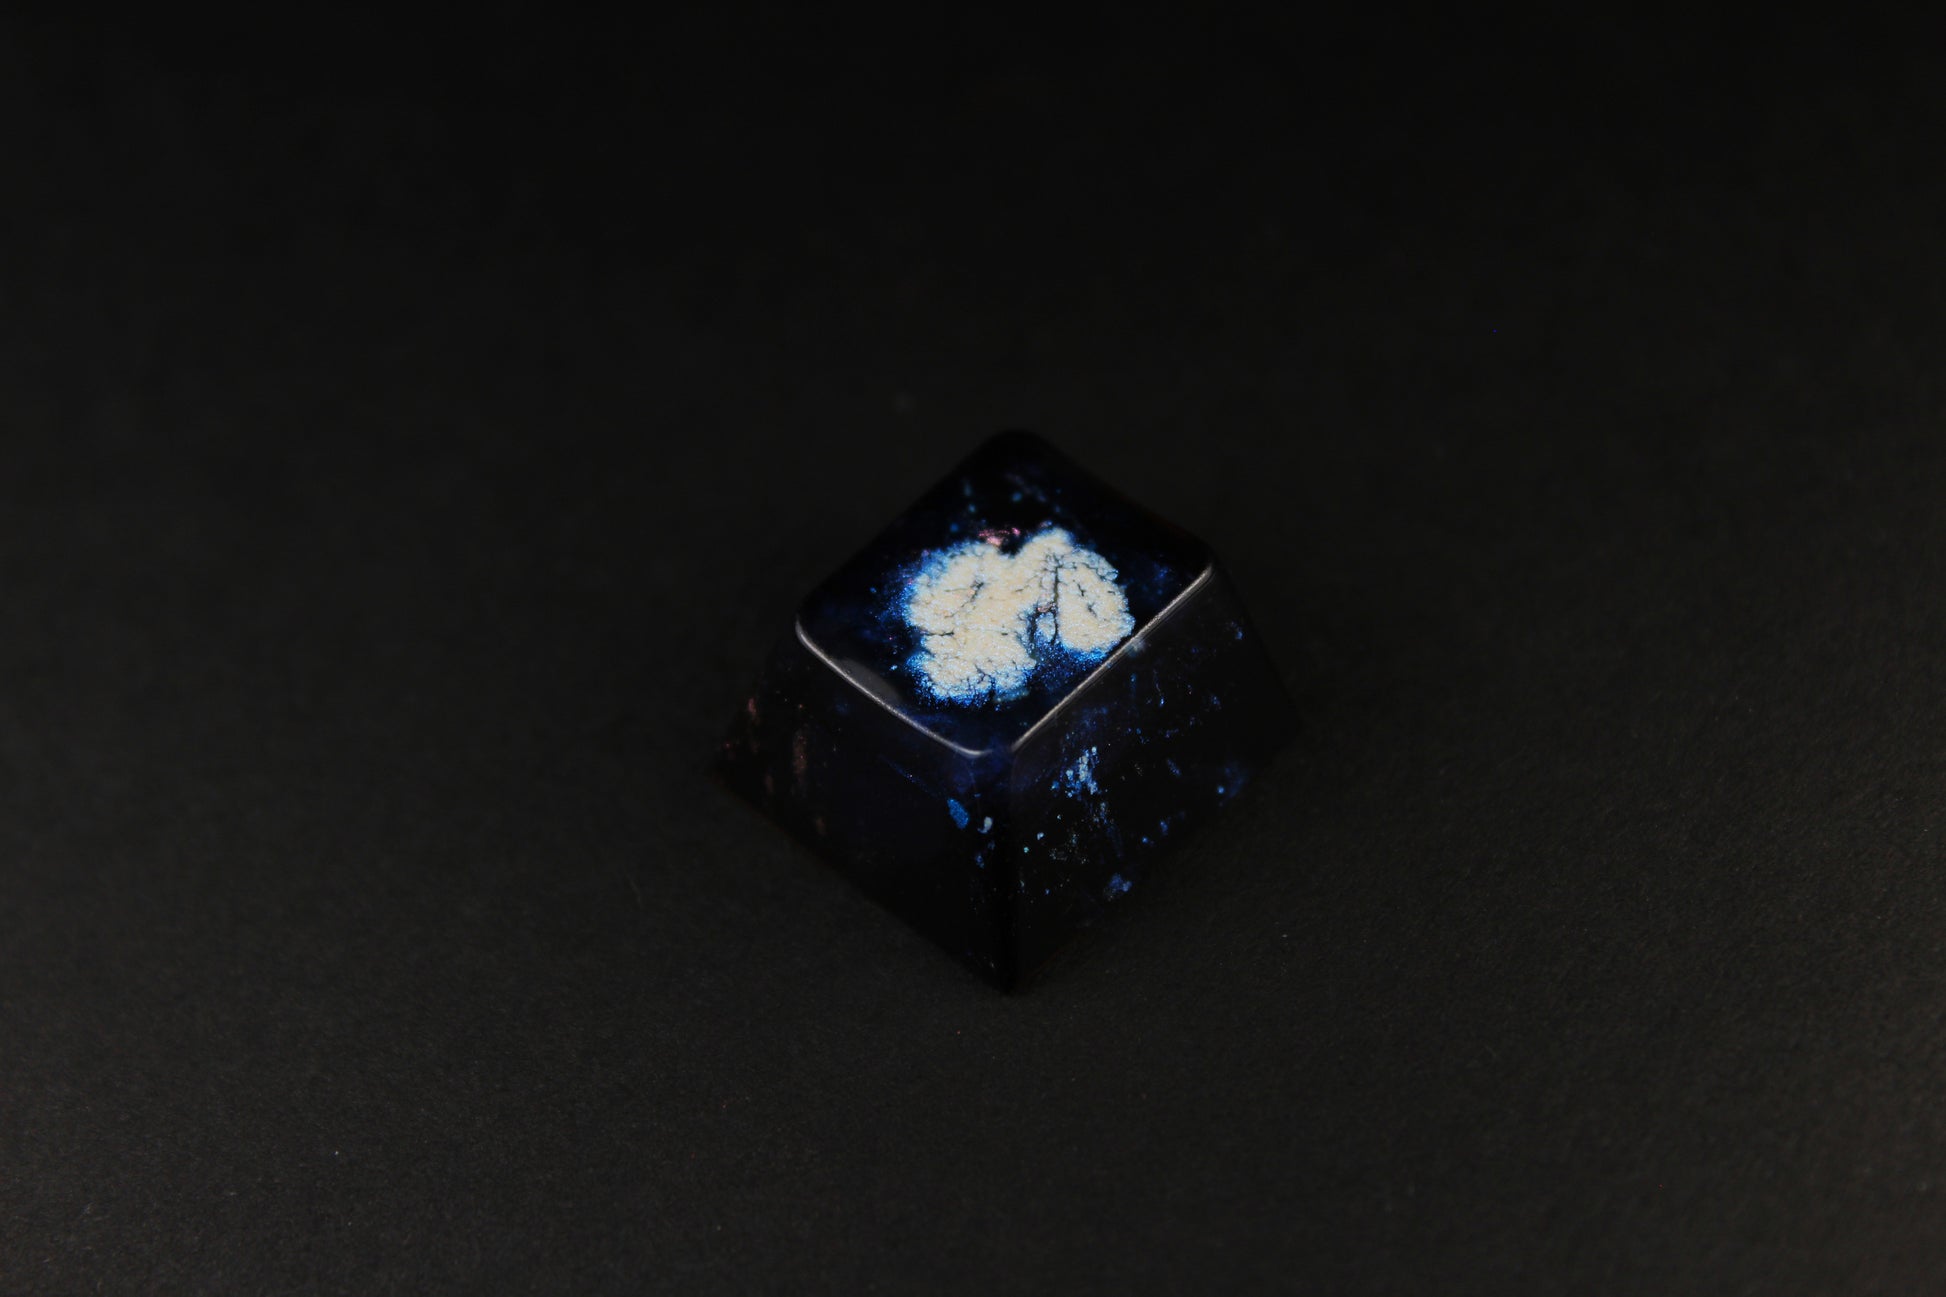 Cherry Esc - Deep Field - Azure - PrimeCaps Keycap - Blank and Sculpted Artisan Keycaps for cherry MX mechanical keyboards 